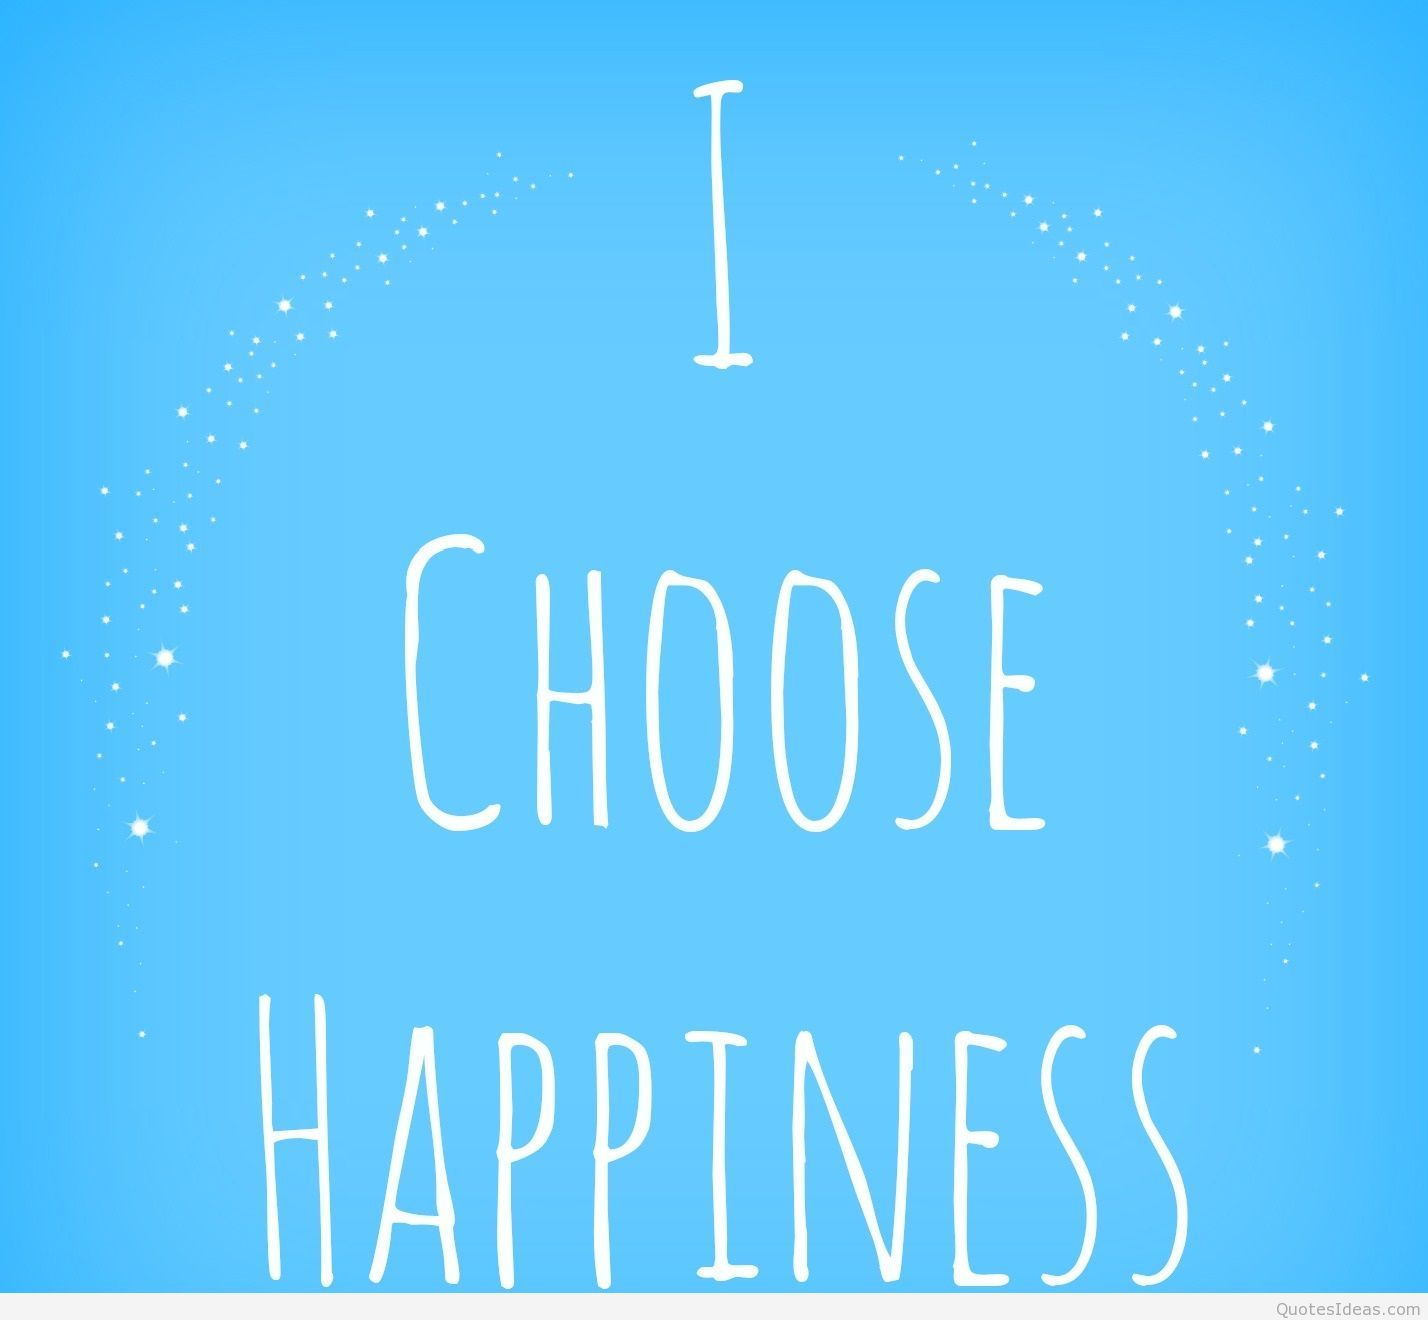 Happiness Wallpaper Free Happiness Background